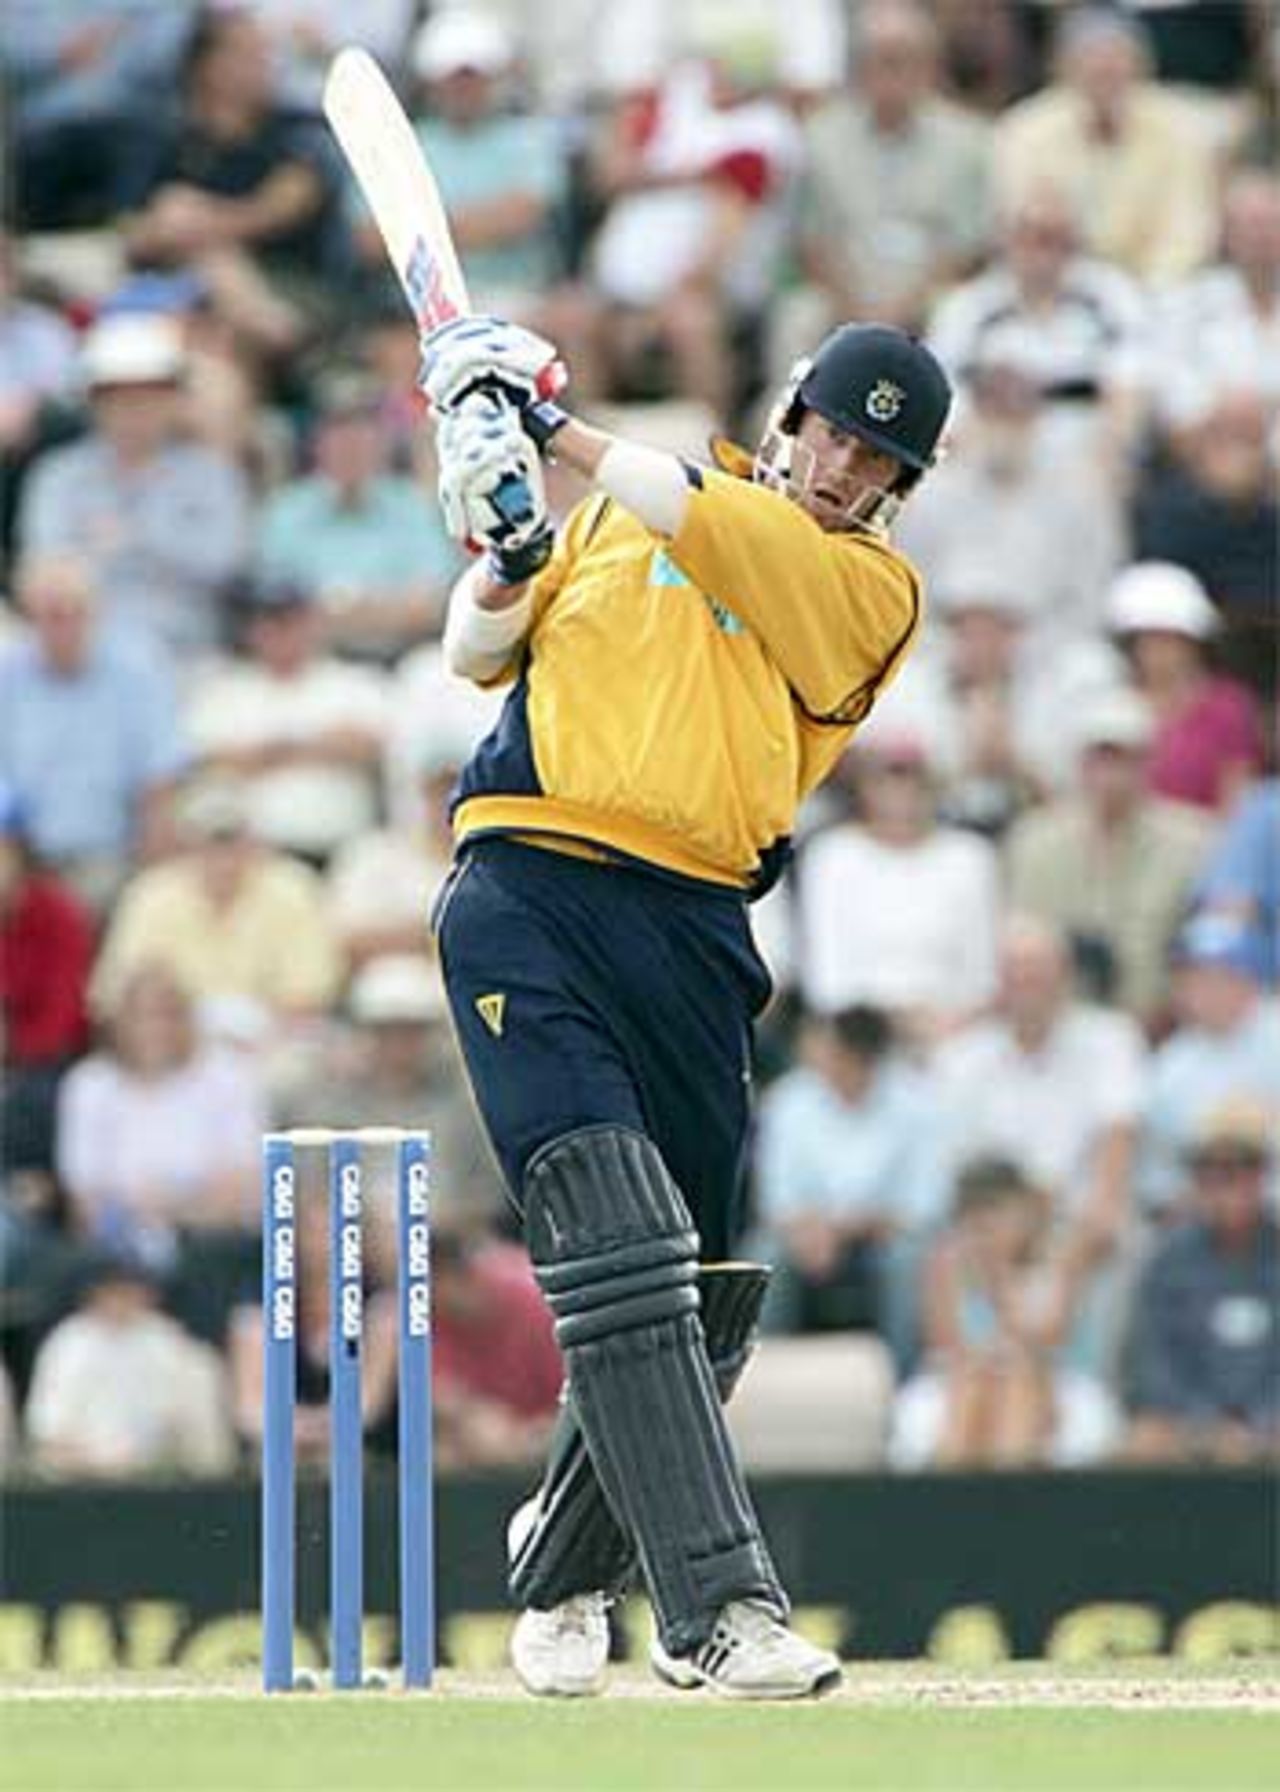 Sean Ervine blasts through mid-wicket on his way to a matchwinning 100 against Yorkshire, Hampshire v Yorkshire, C&G Semi-Final, Rose Bowl, August 20, 2005